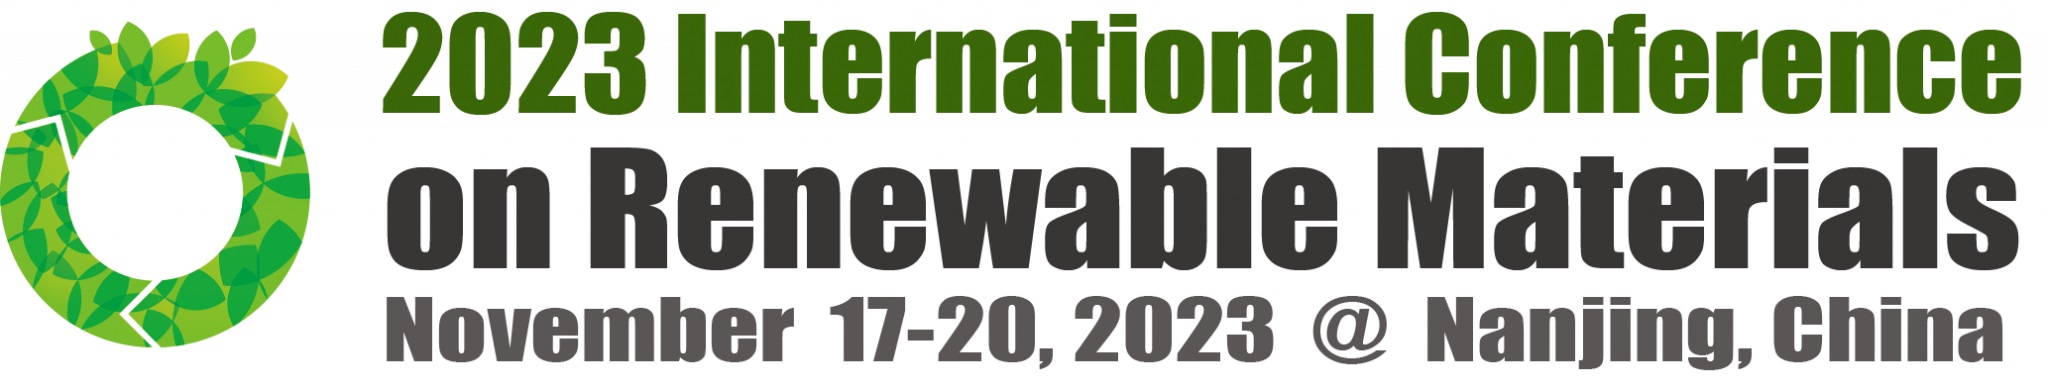 International Conference on Renewable Materials